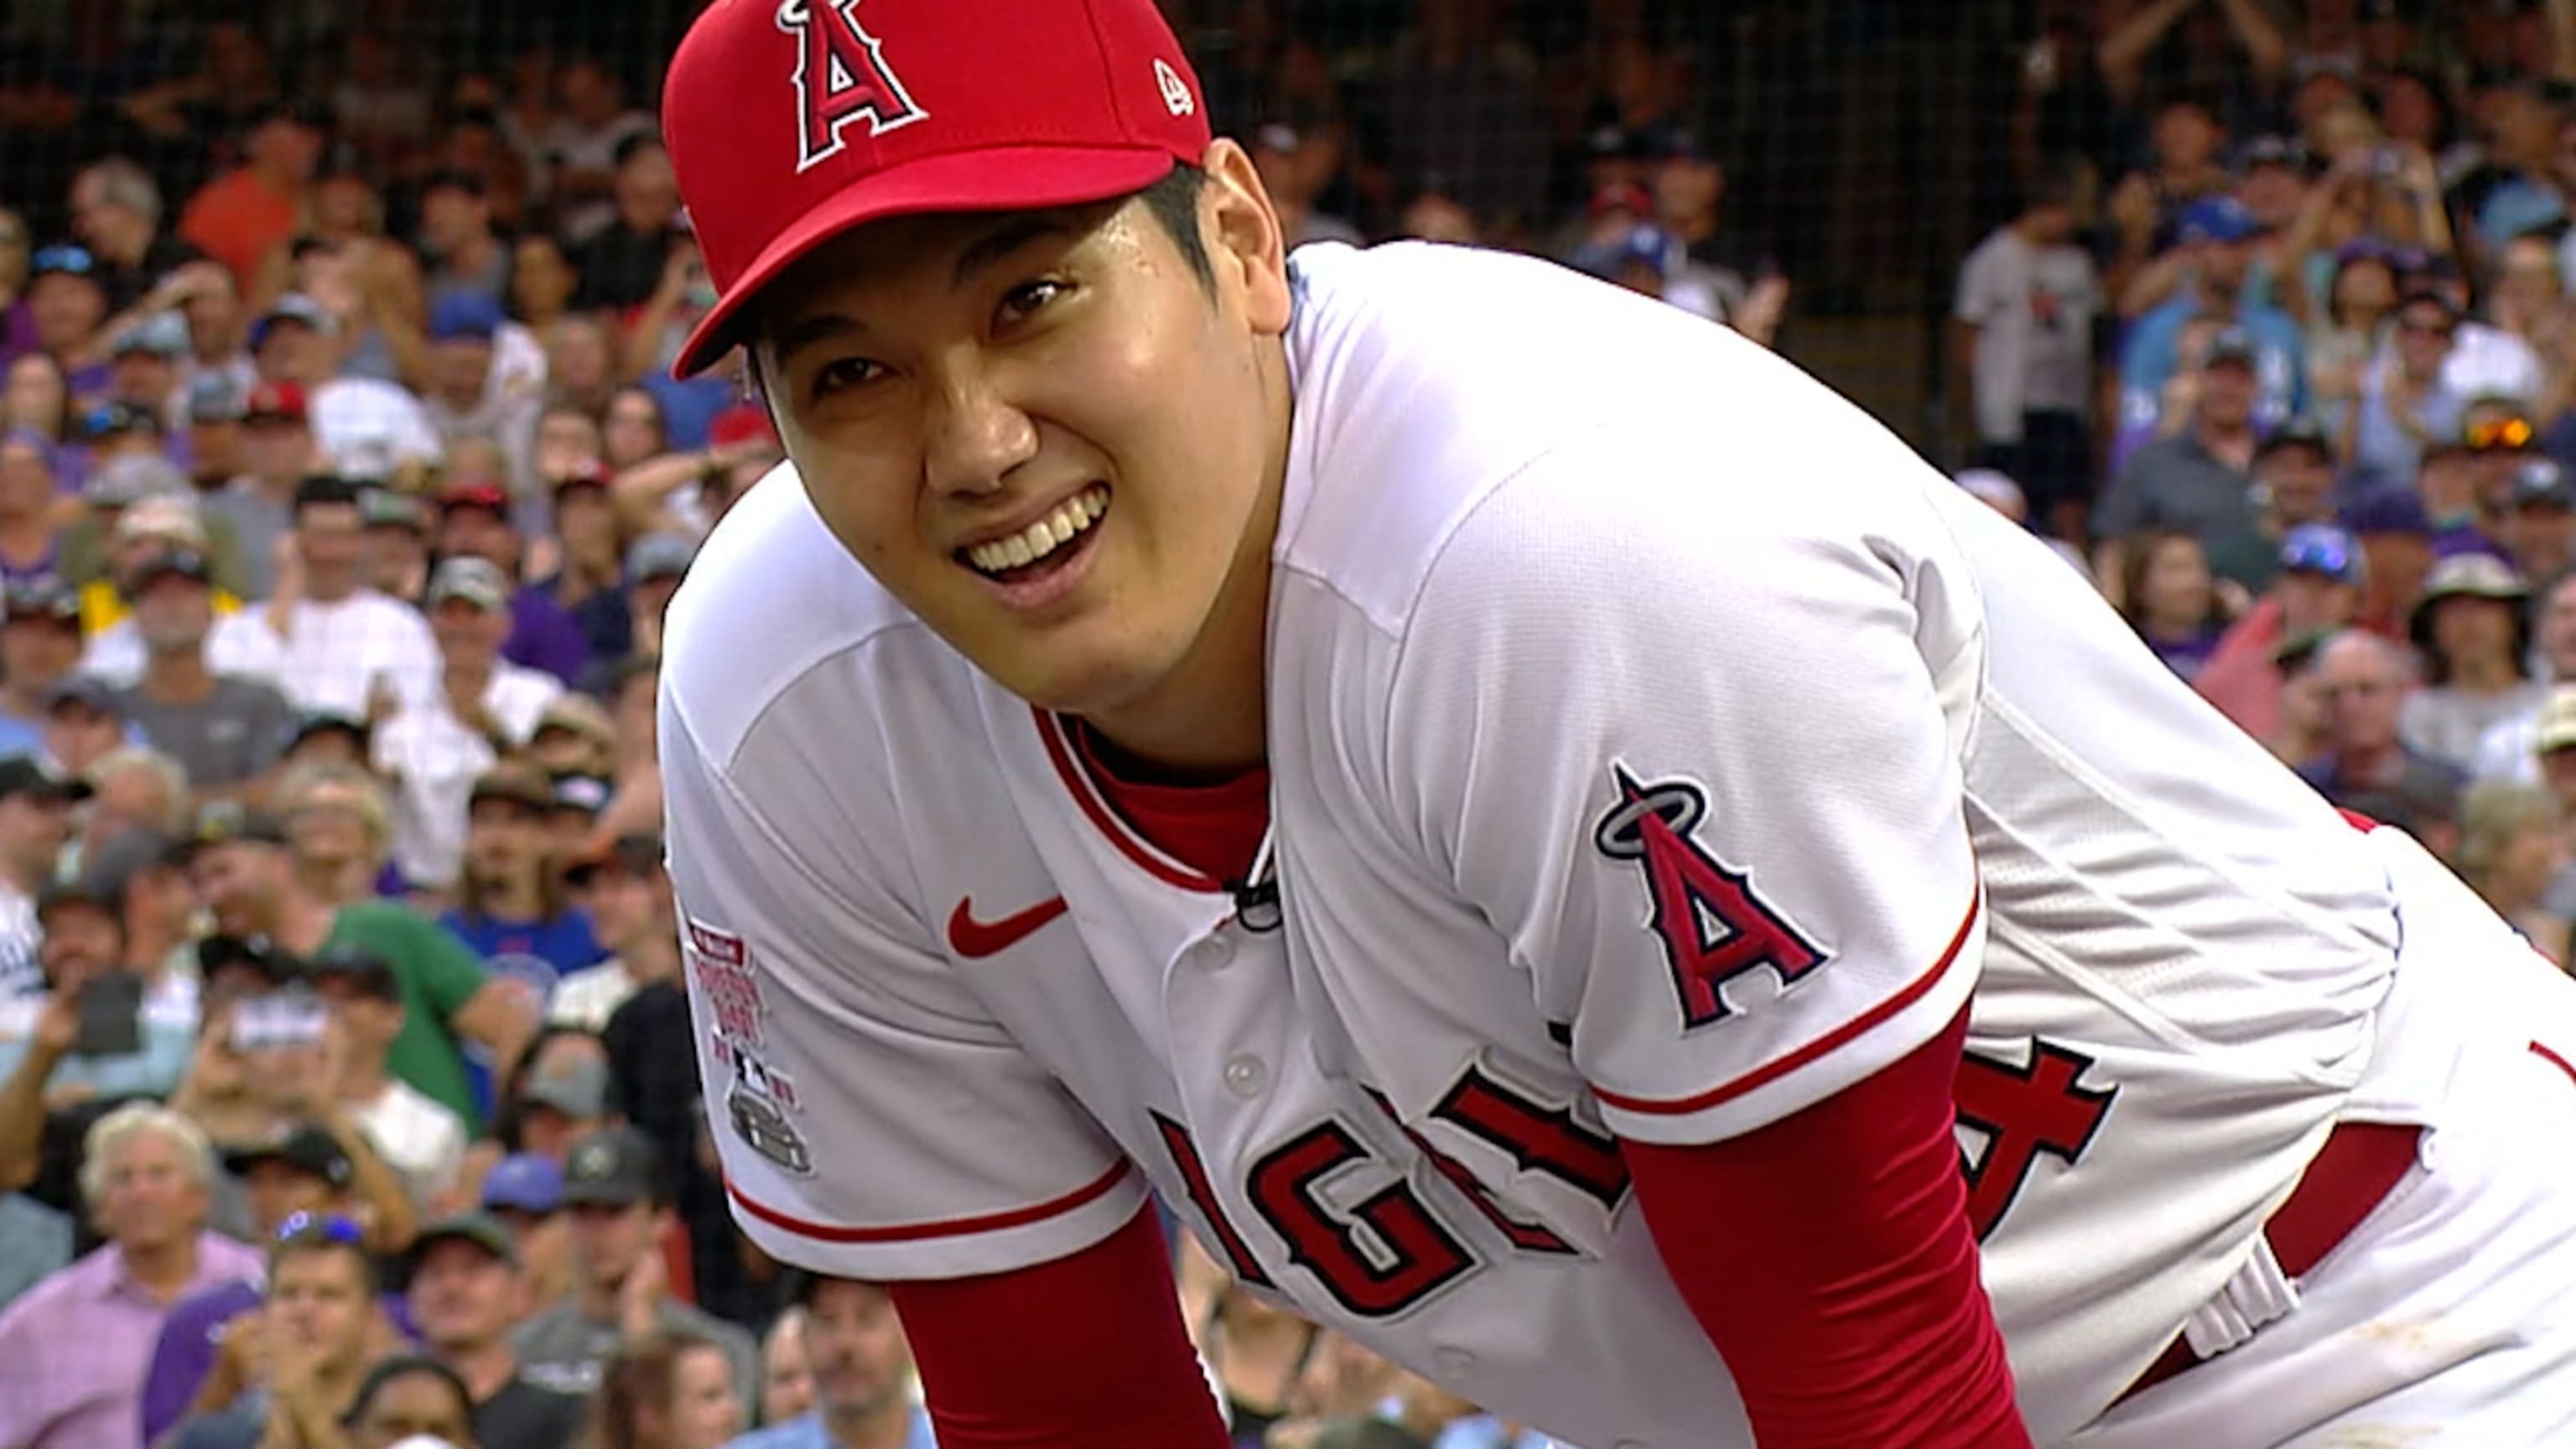 Seattle fans wow Shohei Ohtani at MLB All-Star Game, give him